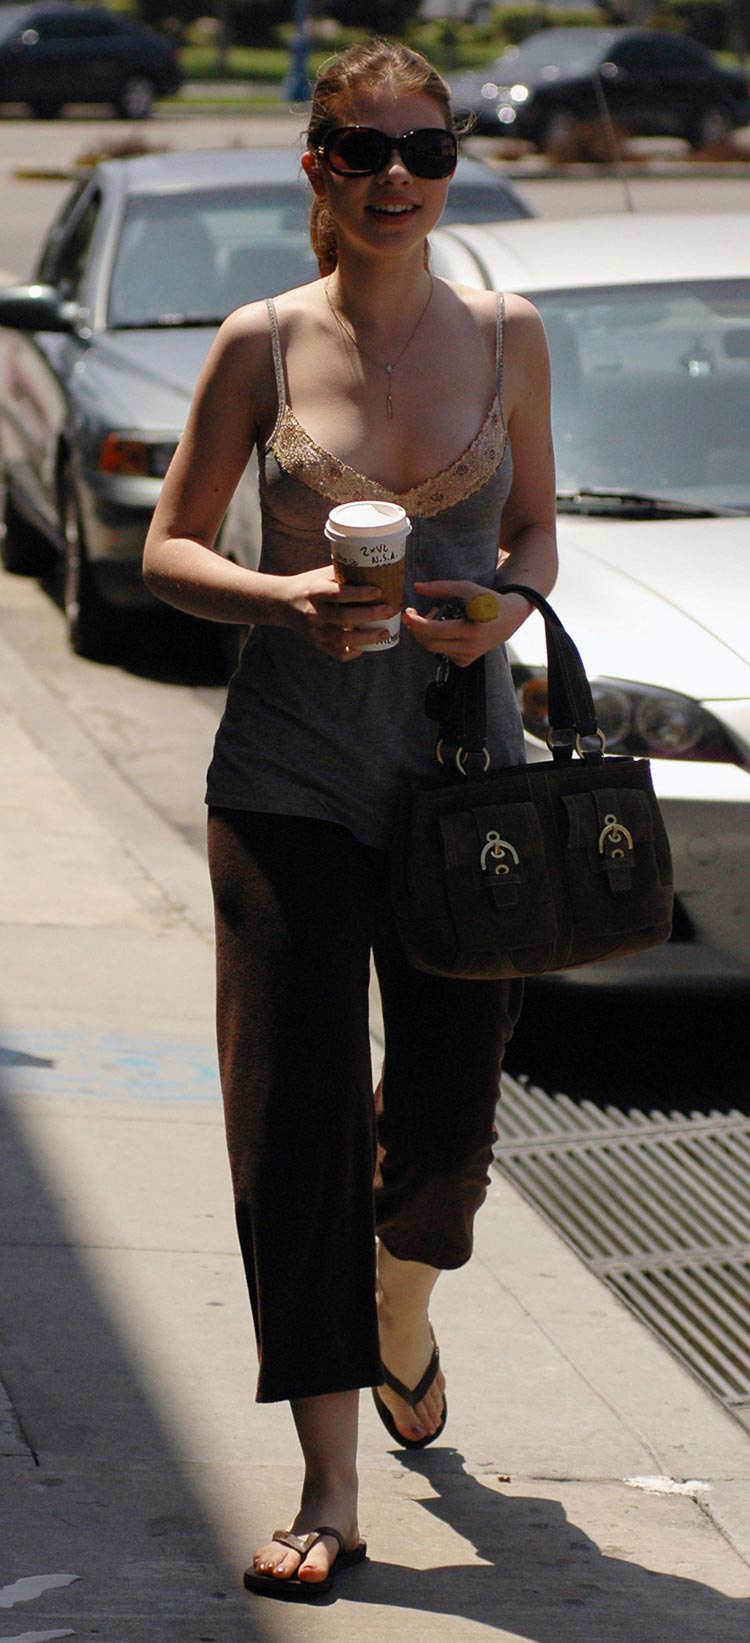 michelle-trachtenberg-out-and-about-august-2005-hq-03-0750.jpg